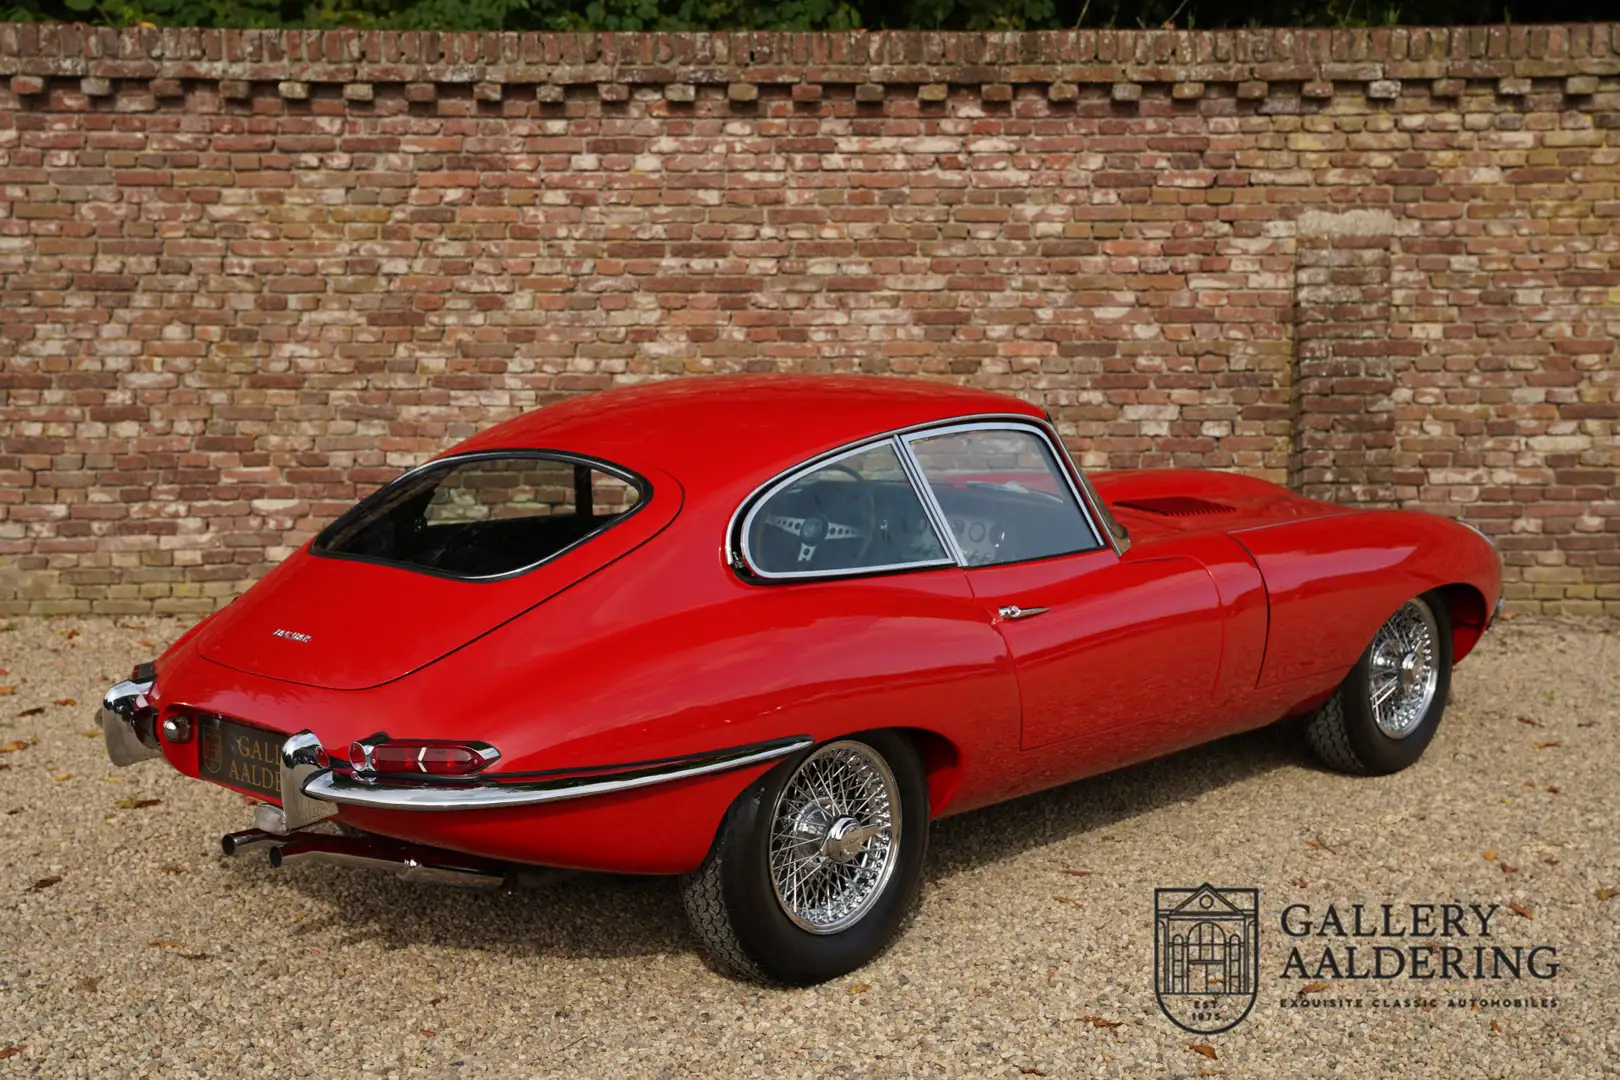 Jaguar E-Type XKE 3.8 series 1 FHC Matching numbers, restored an Rouge - 2